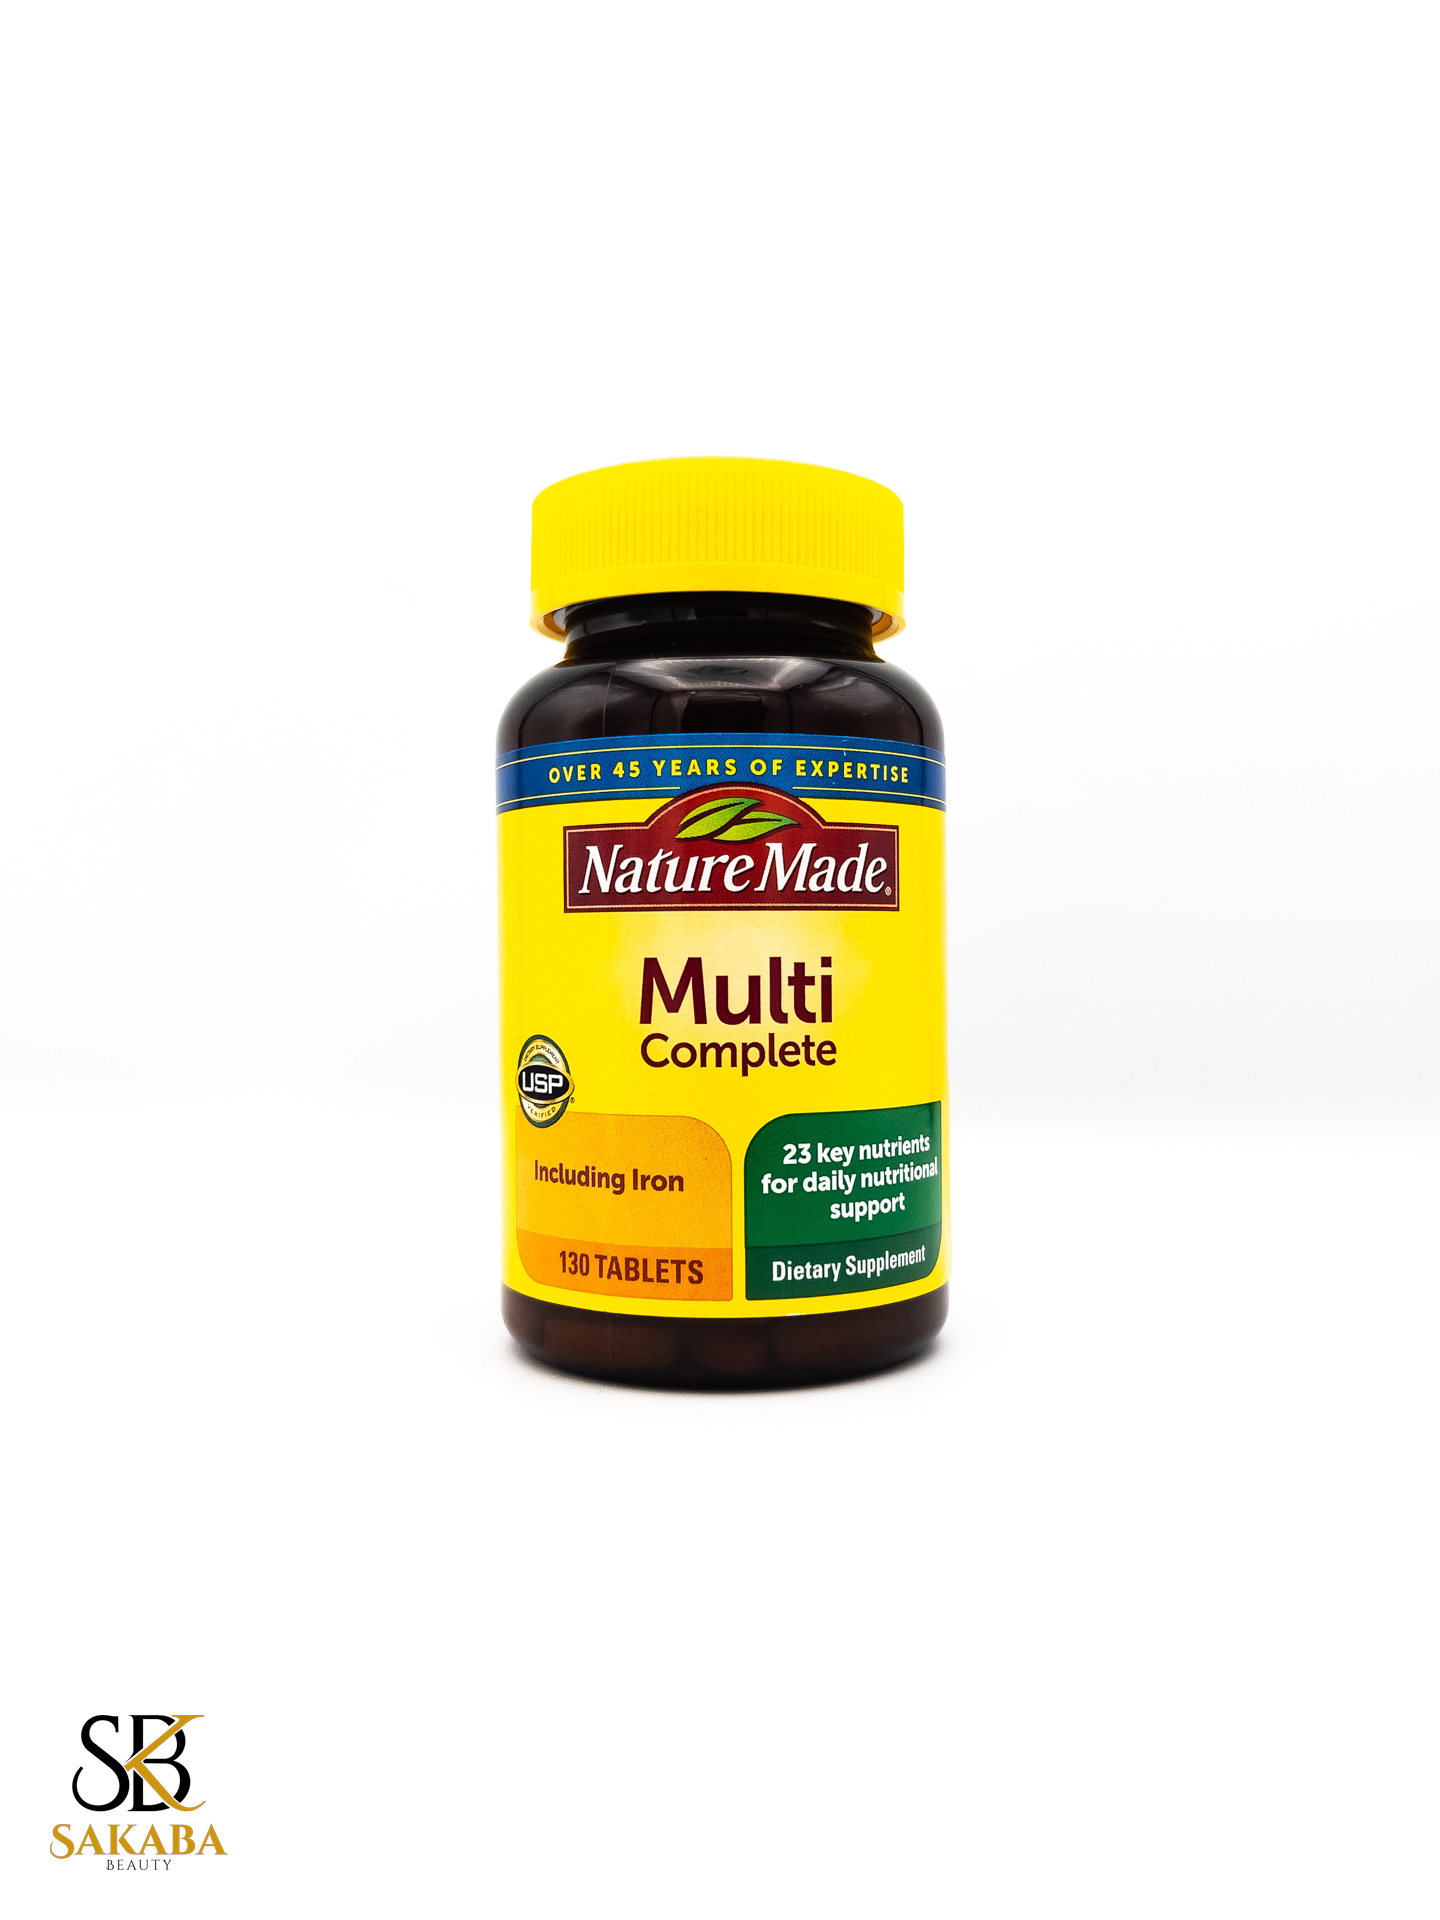 NATURE MADE MULTI COMPLETE 130 TABLETS